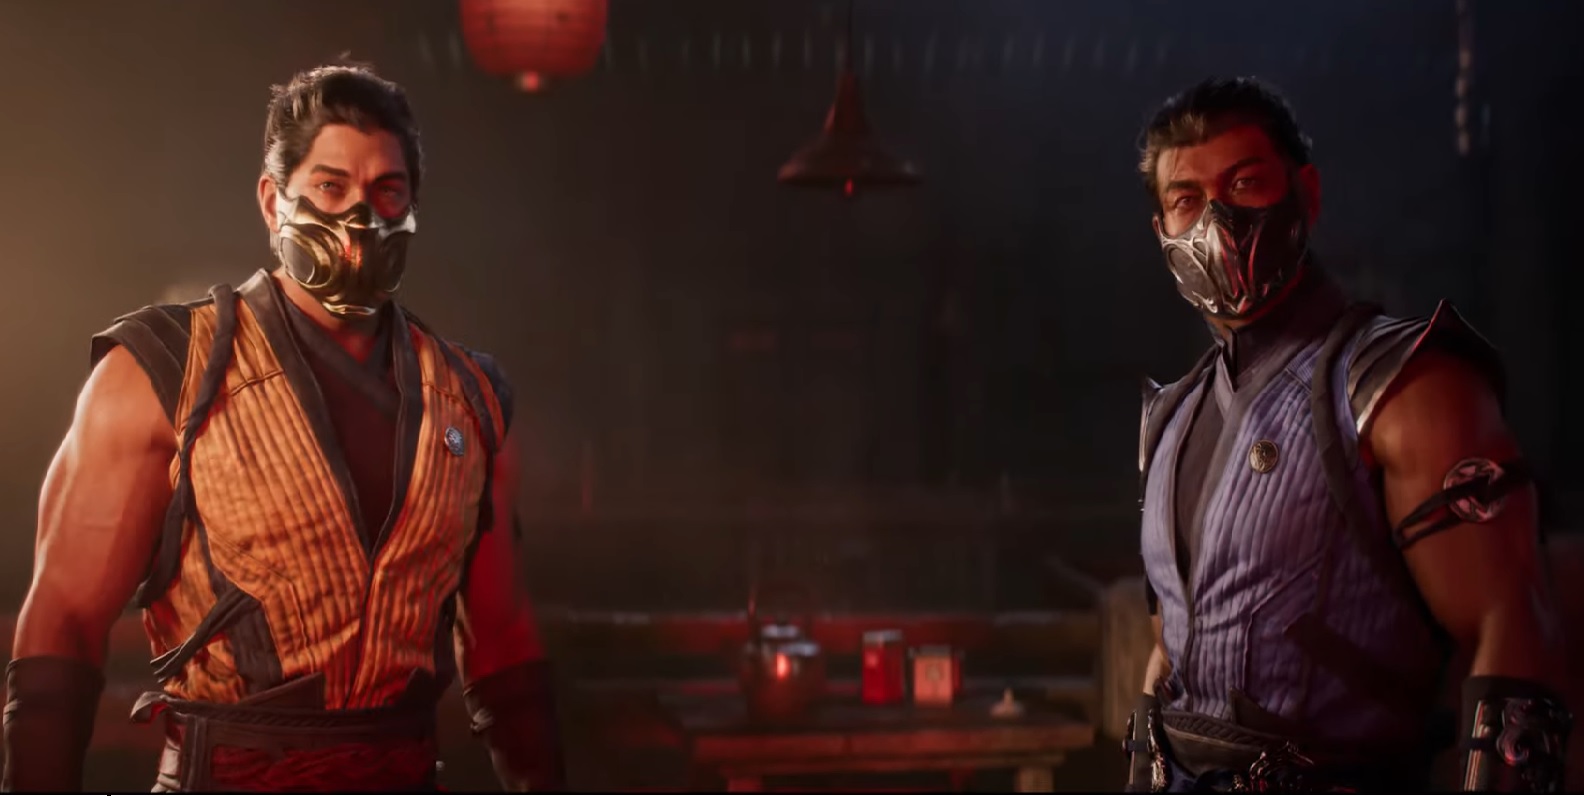 Mortal Kombat 1 feels like a dream to play, Hands-on preview